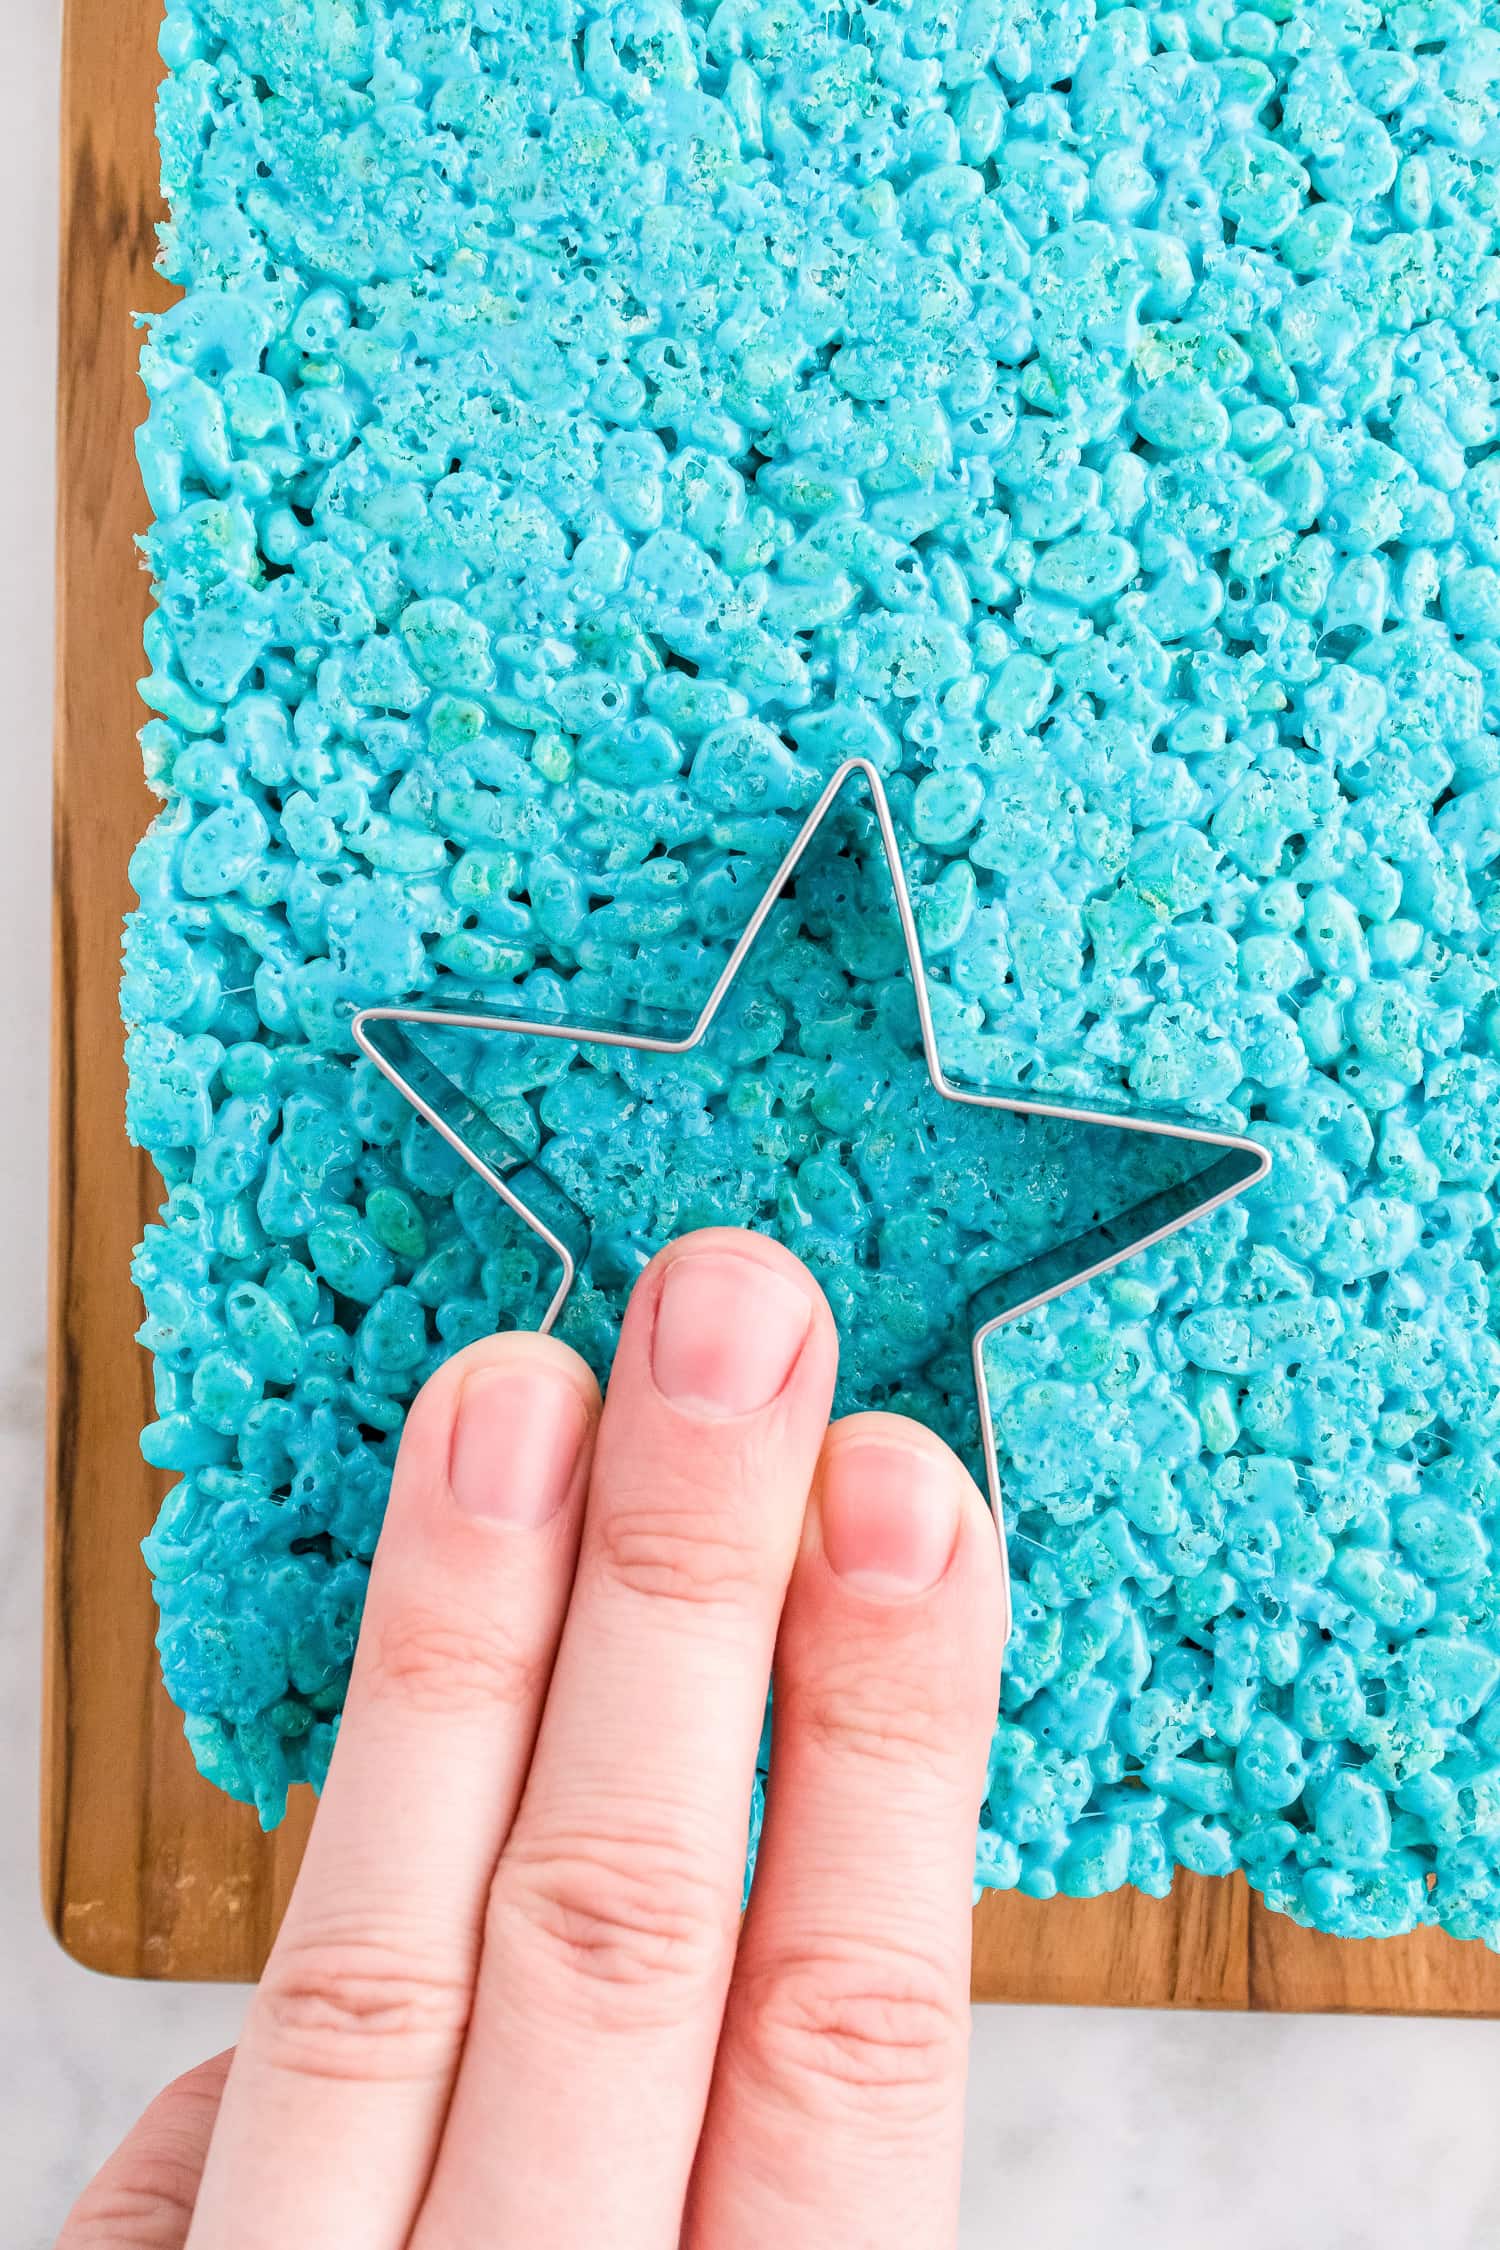 Hand cutting out rice krispie treats with star cookie cutter